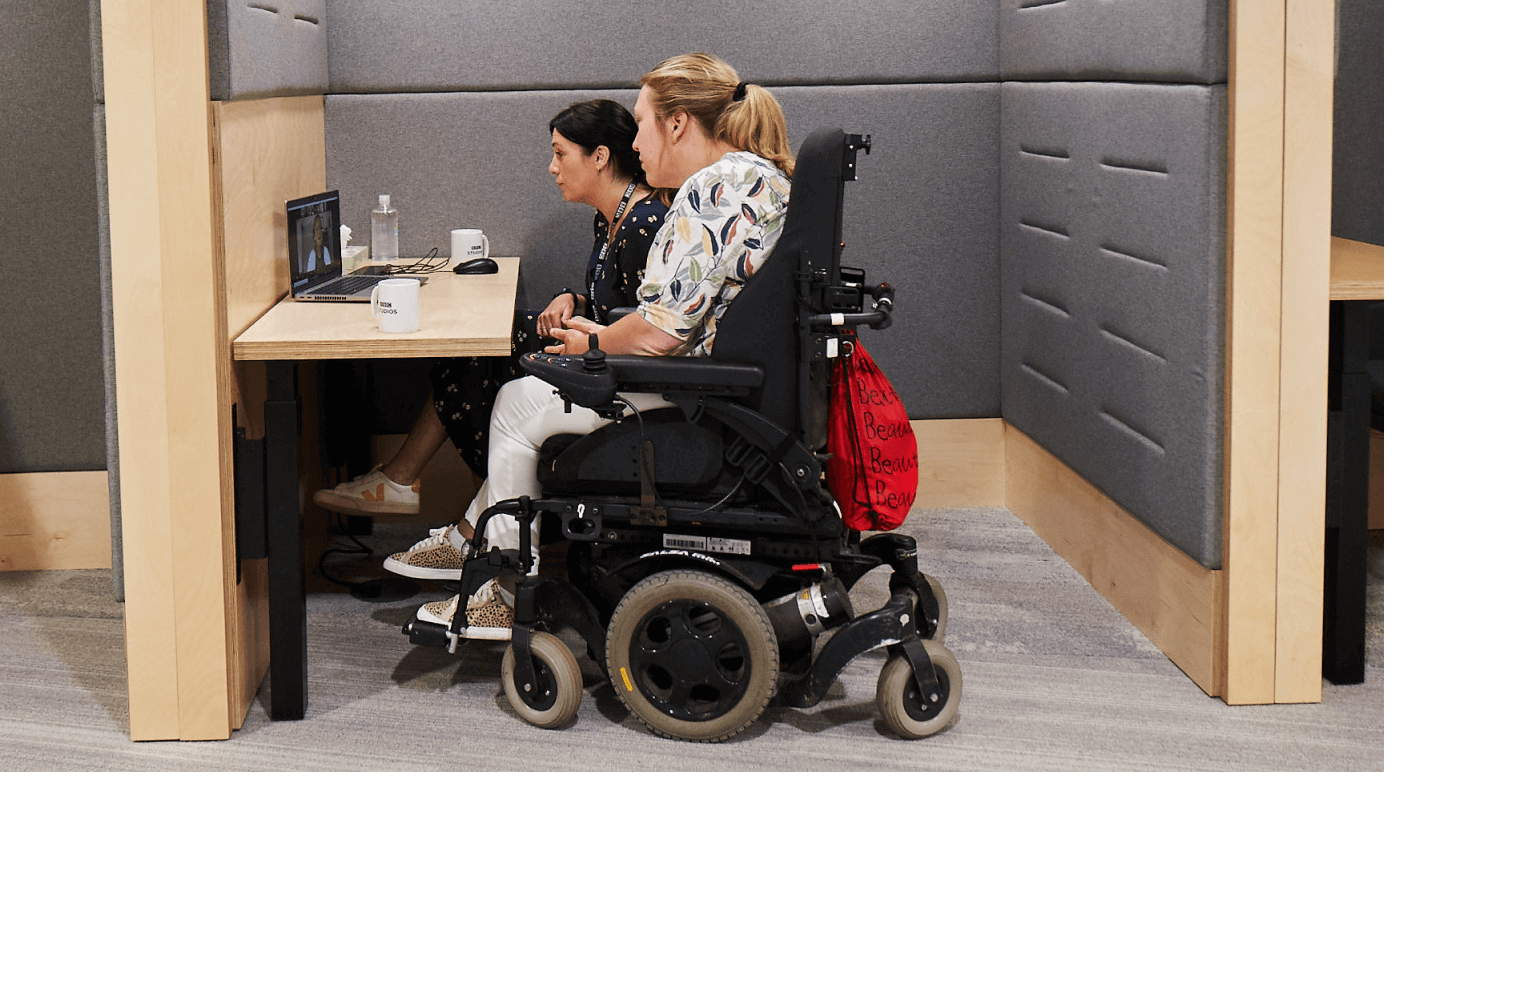 Two BBC employees in an accessible meeting booth.